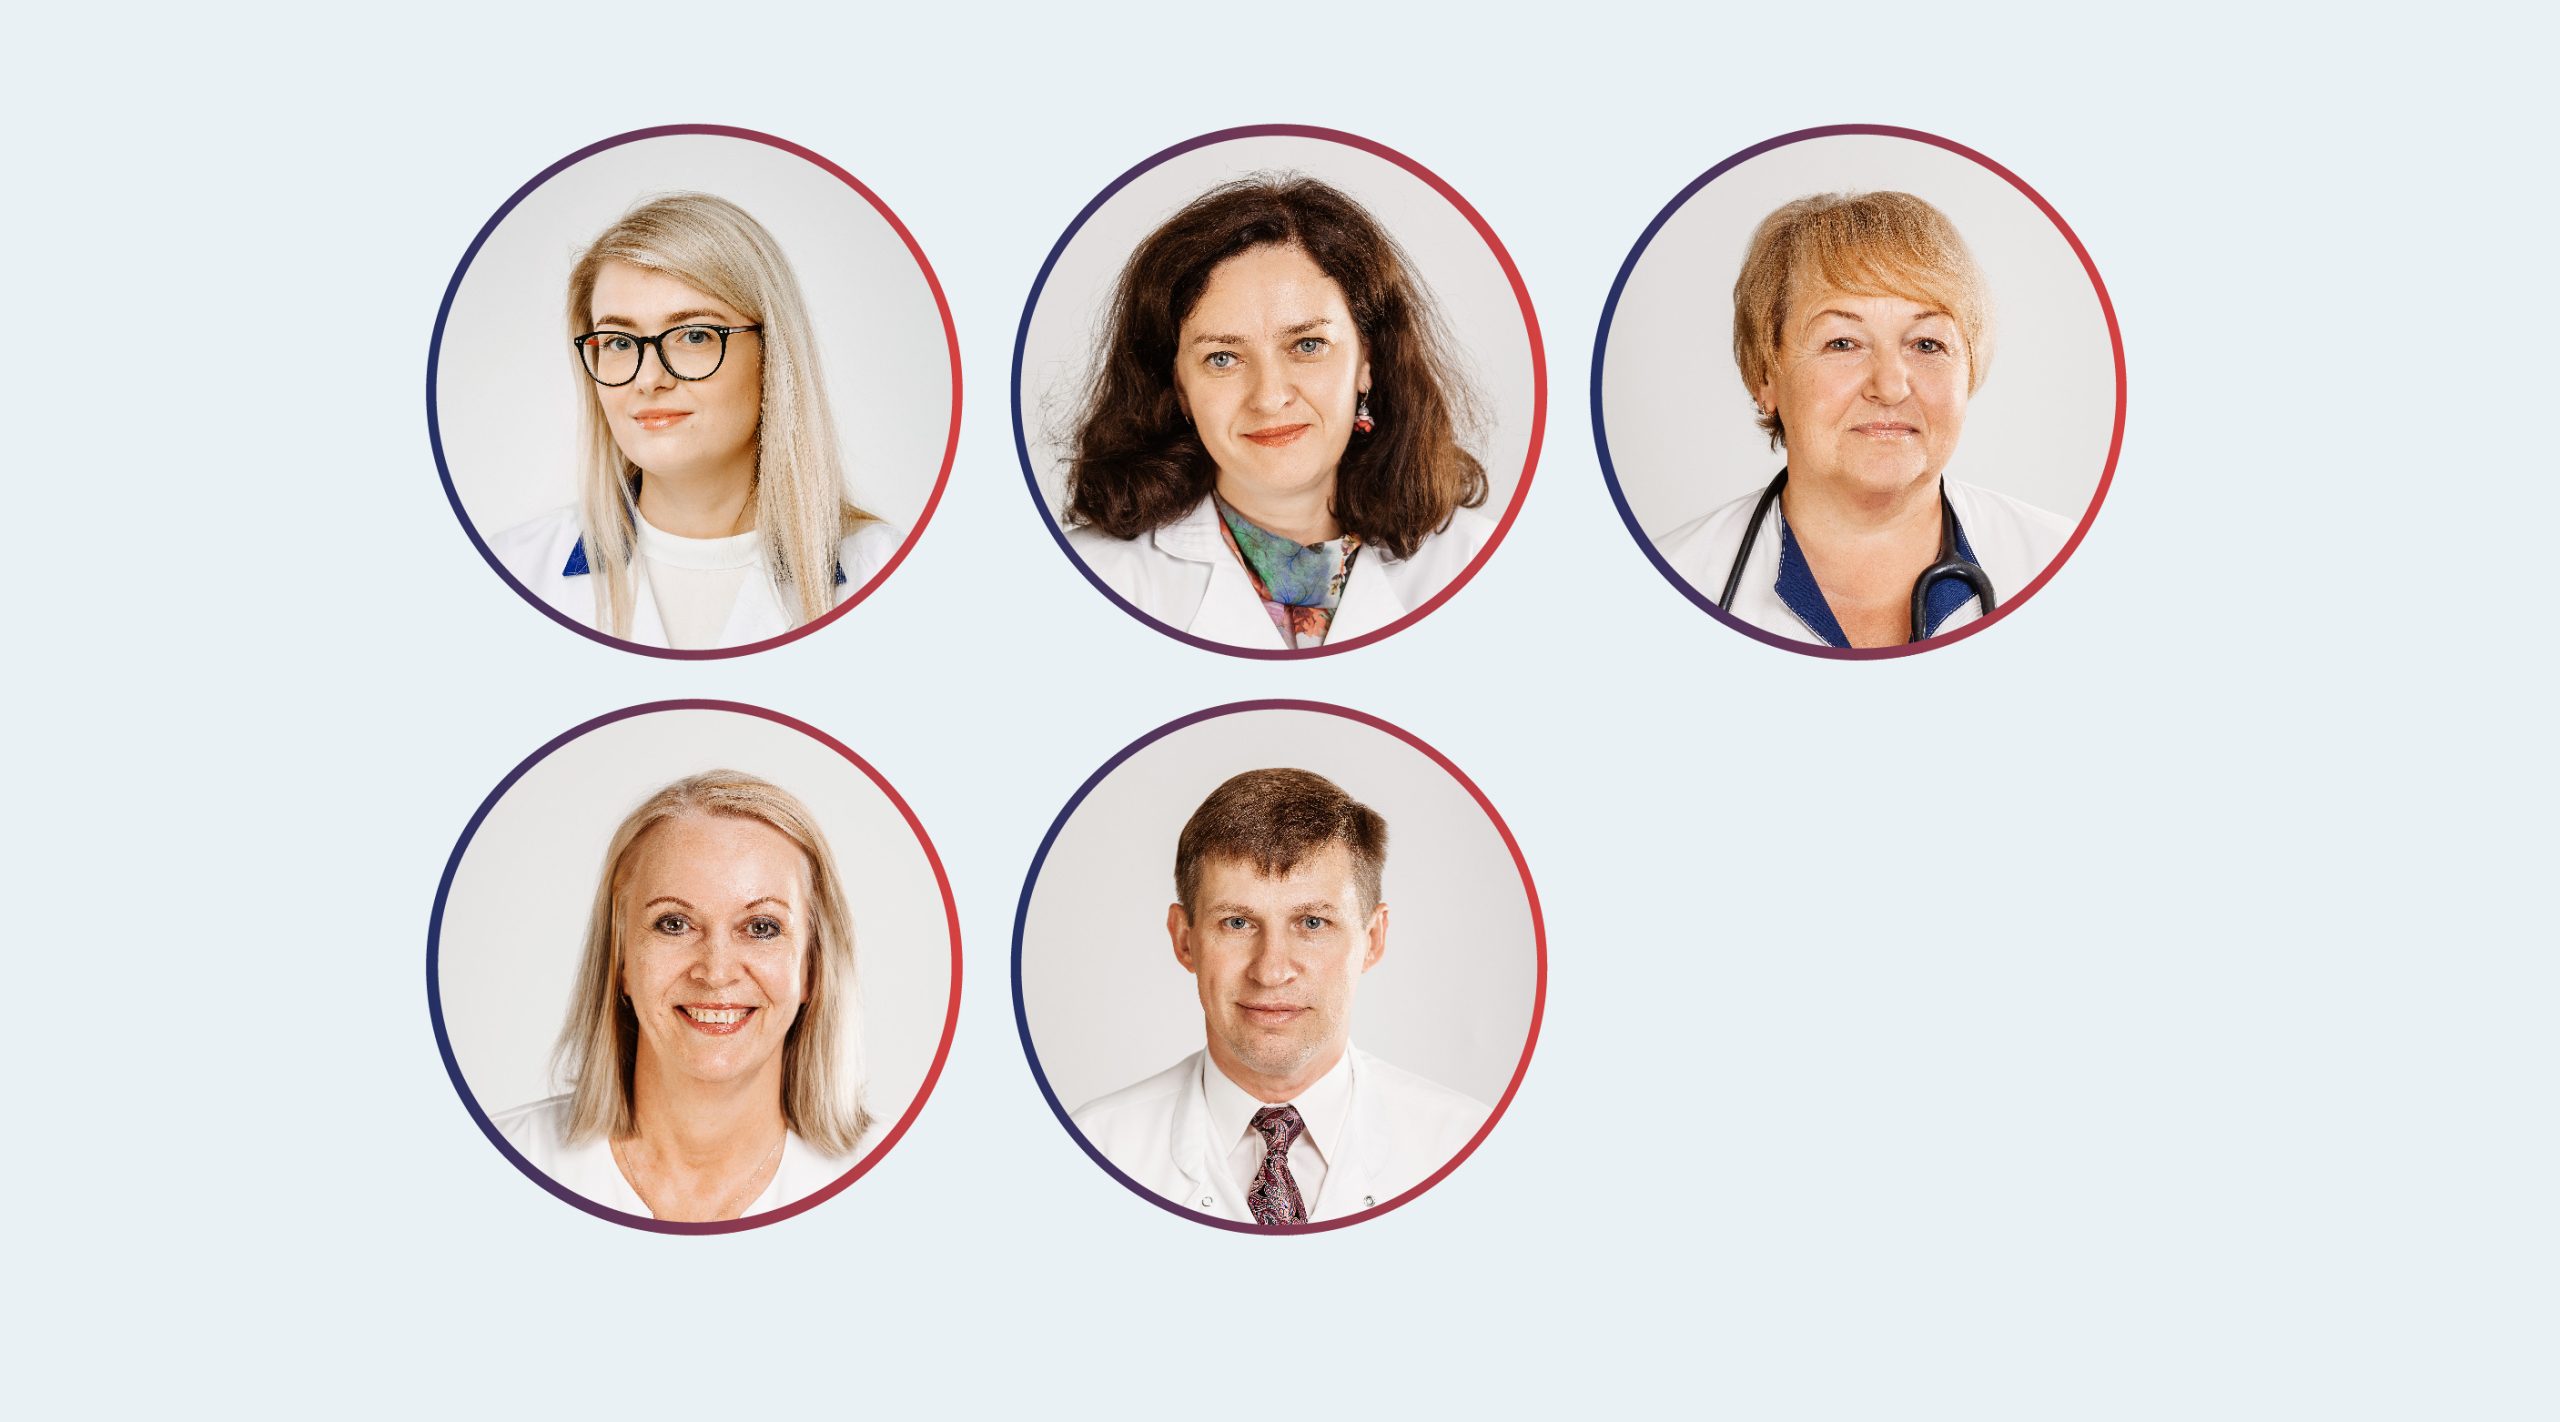 The team of family doctors is ready to help you